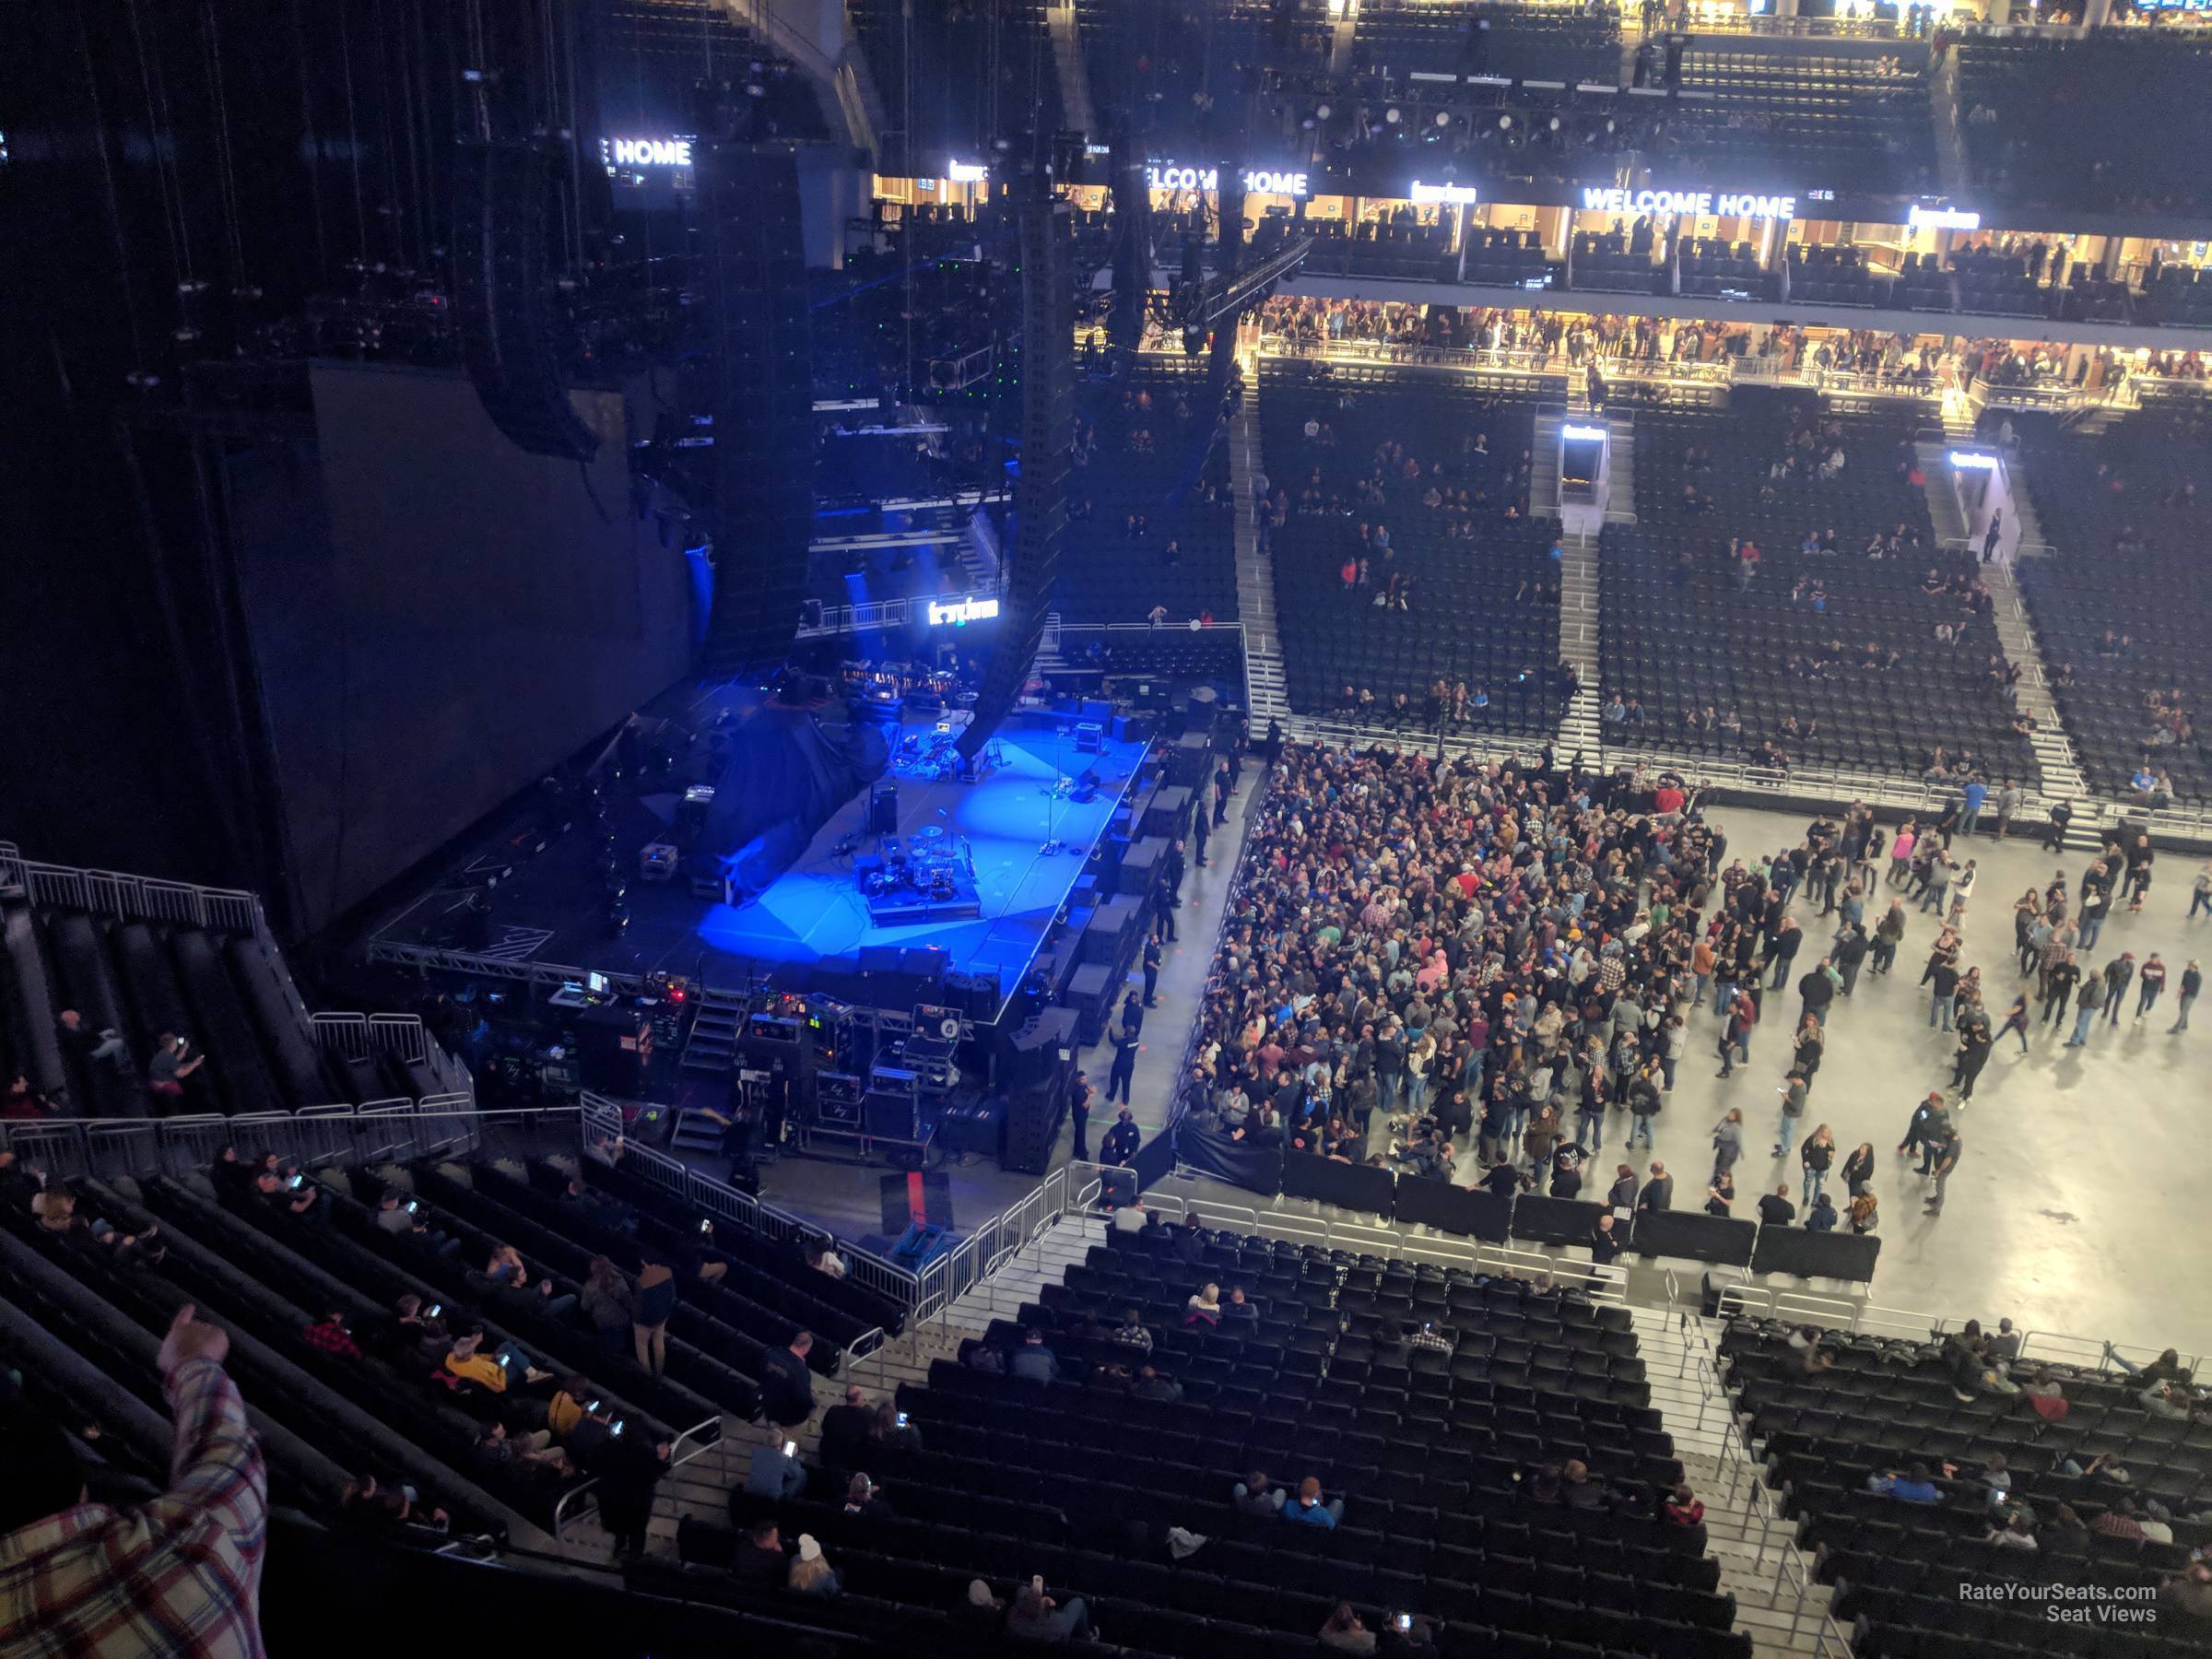 section 209, row 3 seat view  for concert - fiserv forum